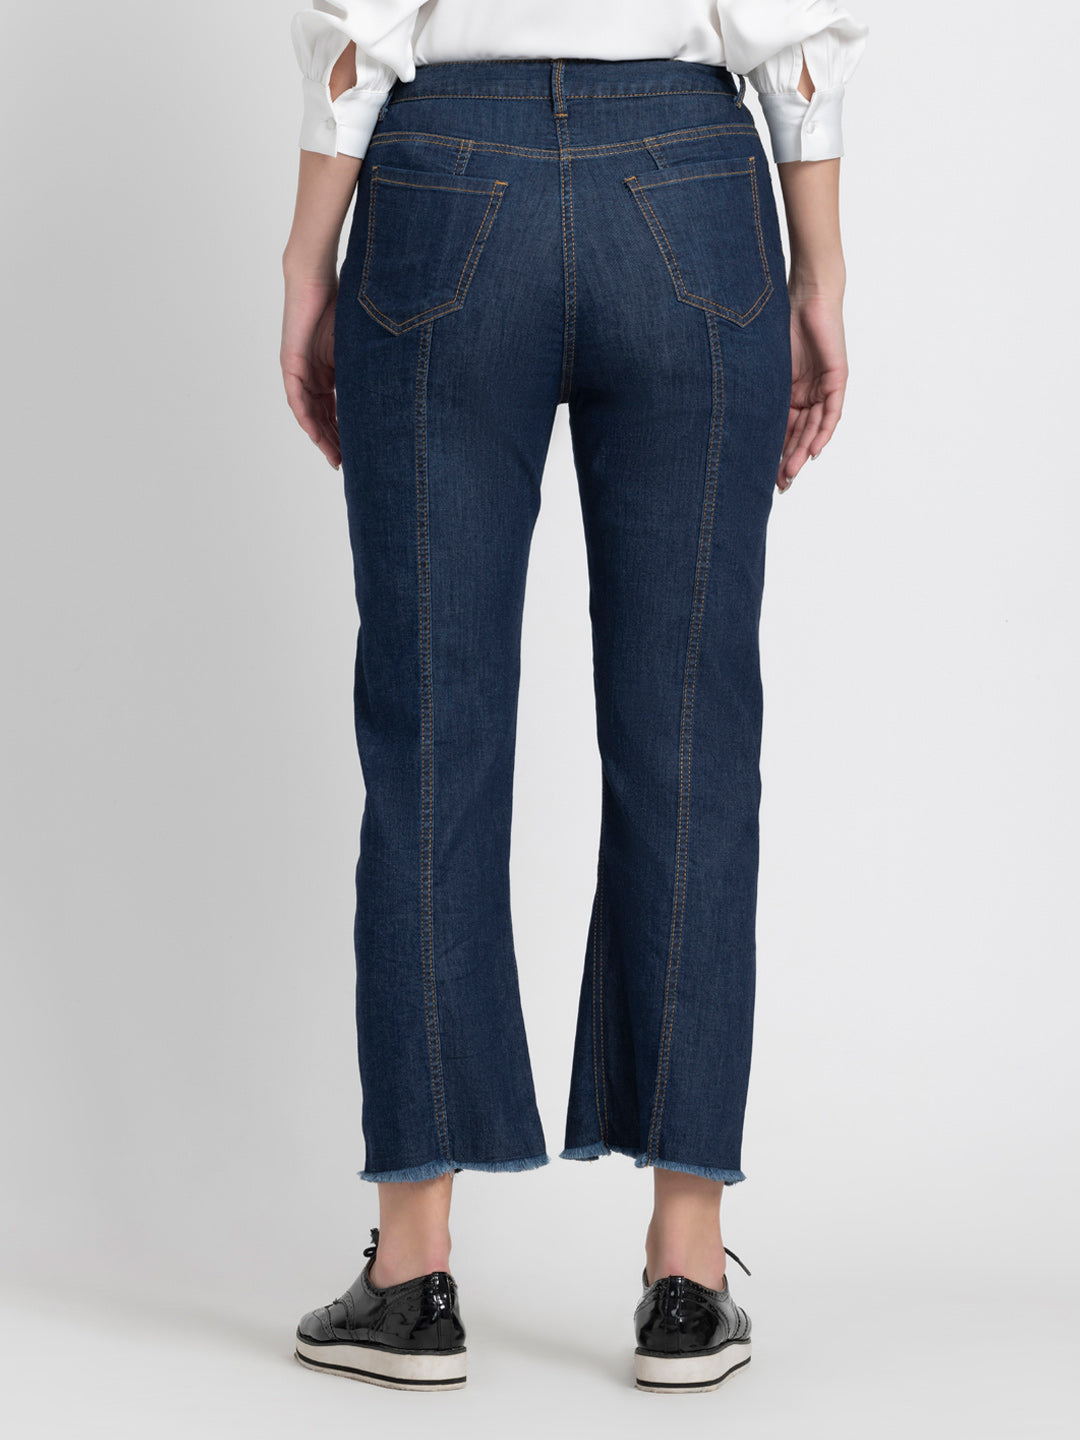 Fifth Avenue Jeans from Shaye India , Jeans for women